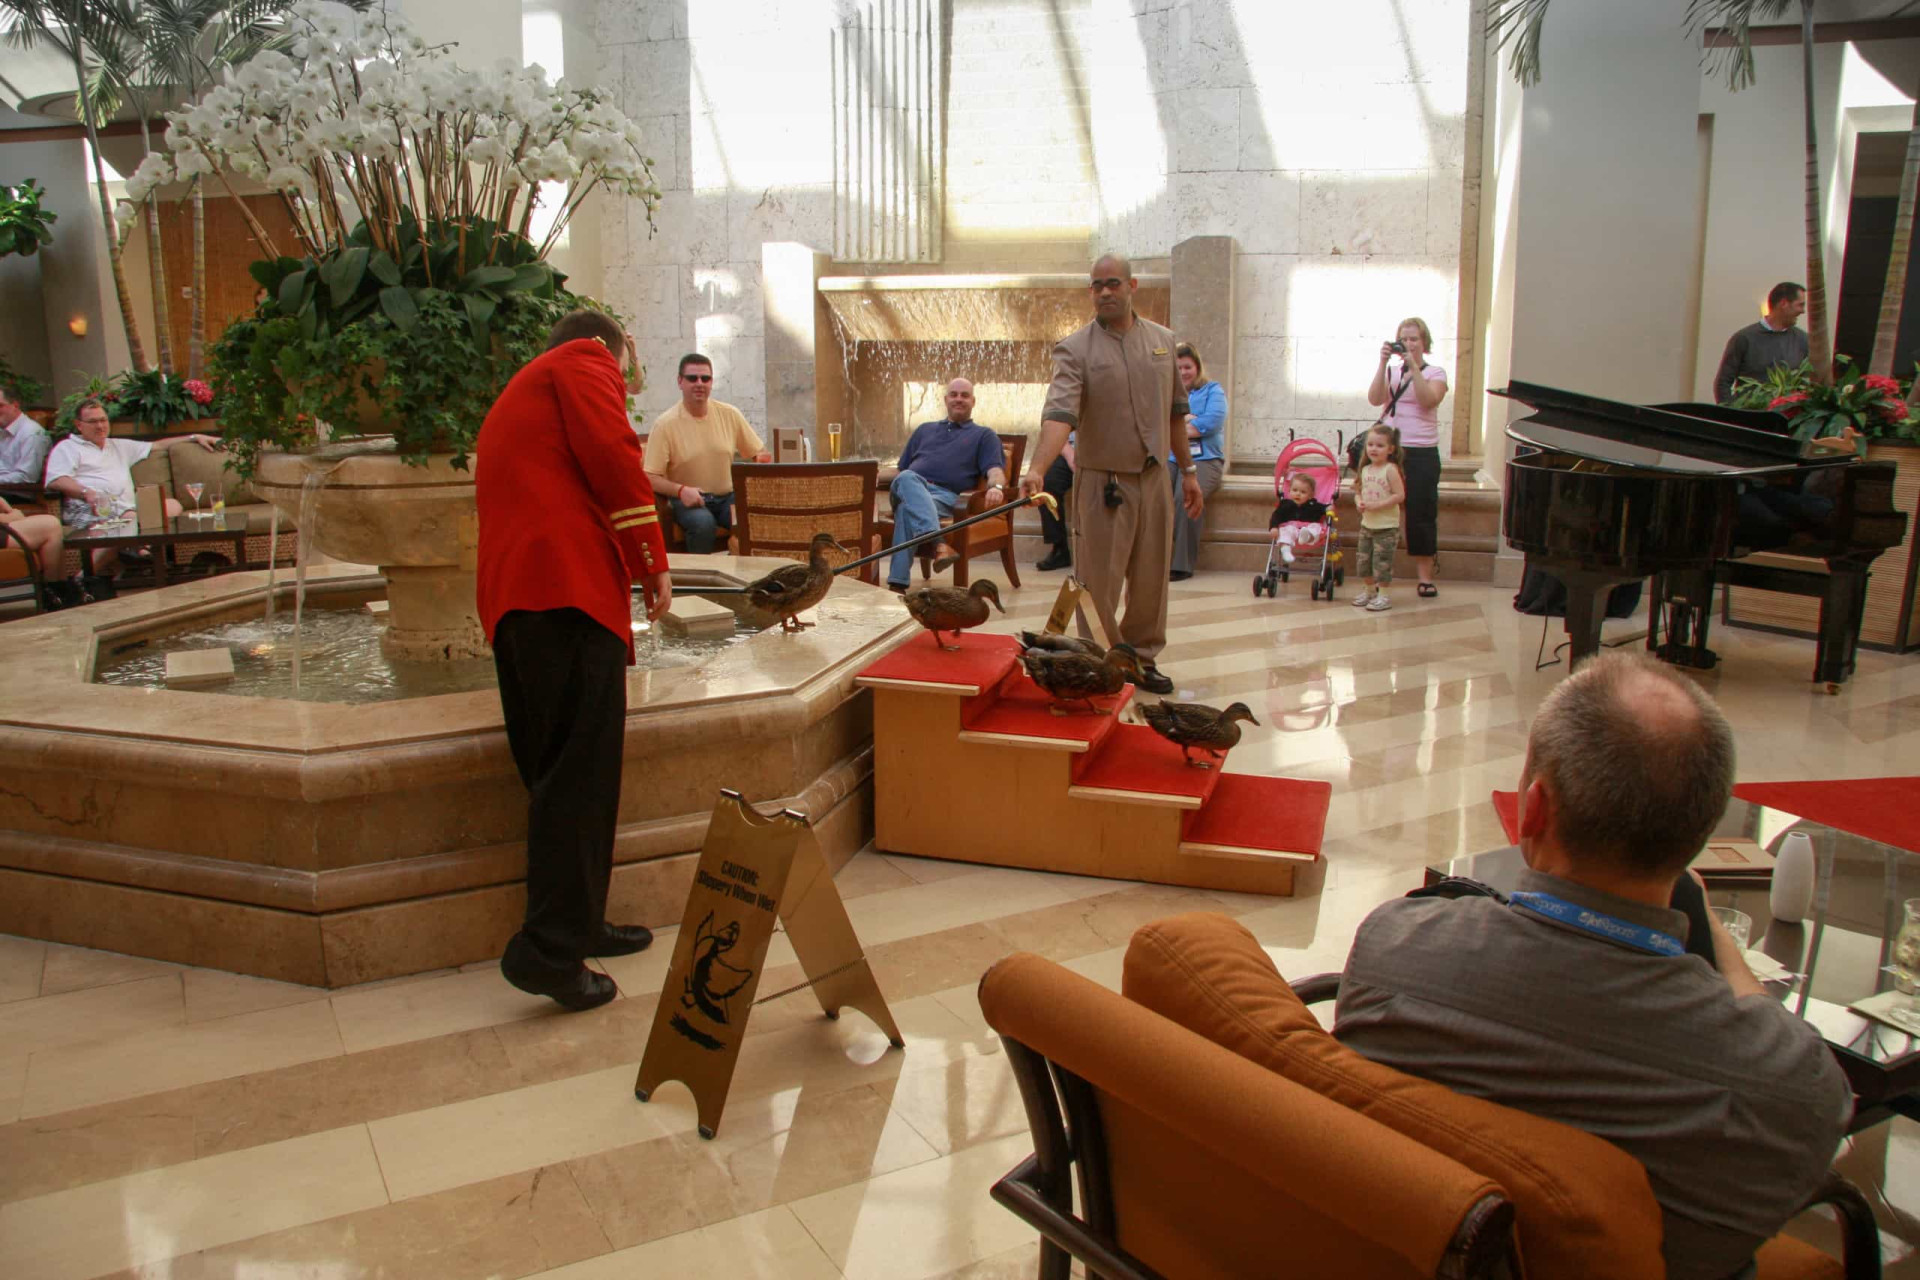 <p>At exactly 11 am and 5 pm every day, five mallards visit the lobby fountain in the Peabody Hotel, a delightful ritual known as the Peabody Duck March that dates back to the 1930s.</p><p><a href="https://www.msn.com/en-us/community/channel/vid-7xx8mnucu55yw63we9va2gwr7uihbxwc68fxqp25x6tg4ftibpra?cvid=94631541bc0f4f89bfd59158d696ad7e">Follow us and access great exclusive content every day</a></p>